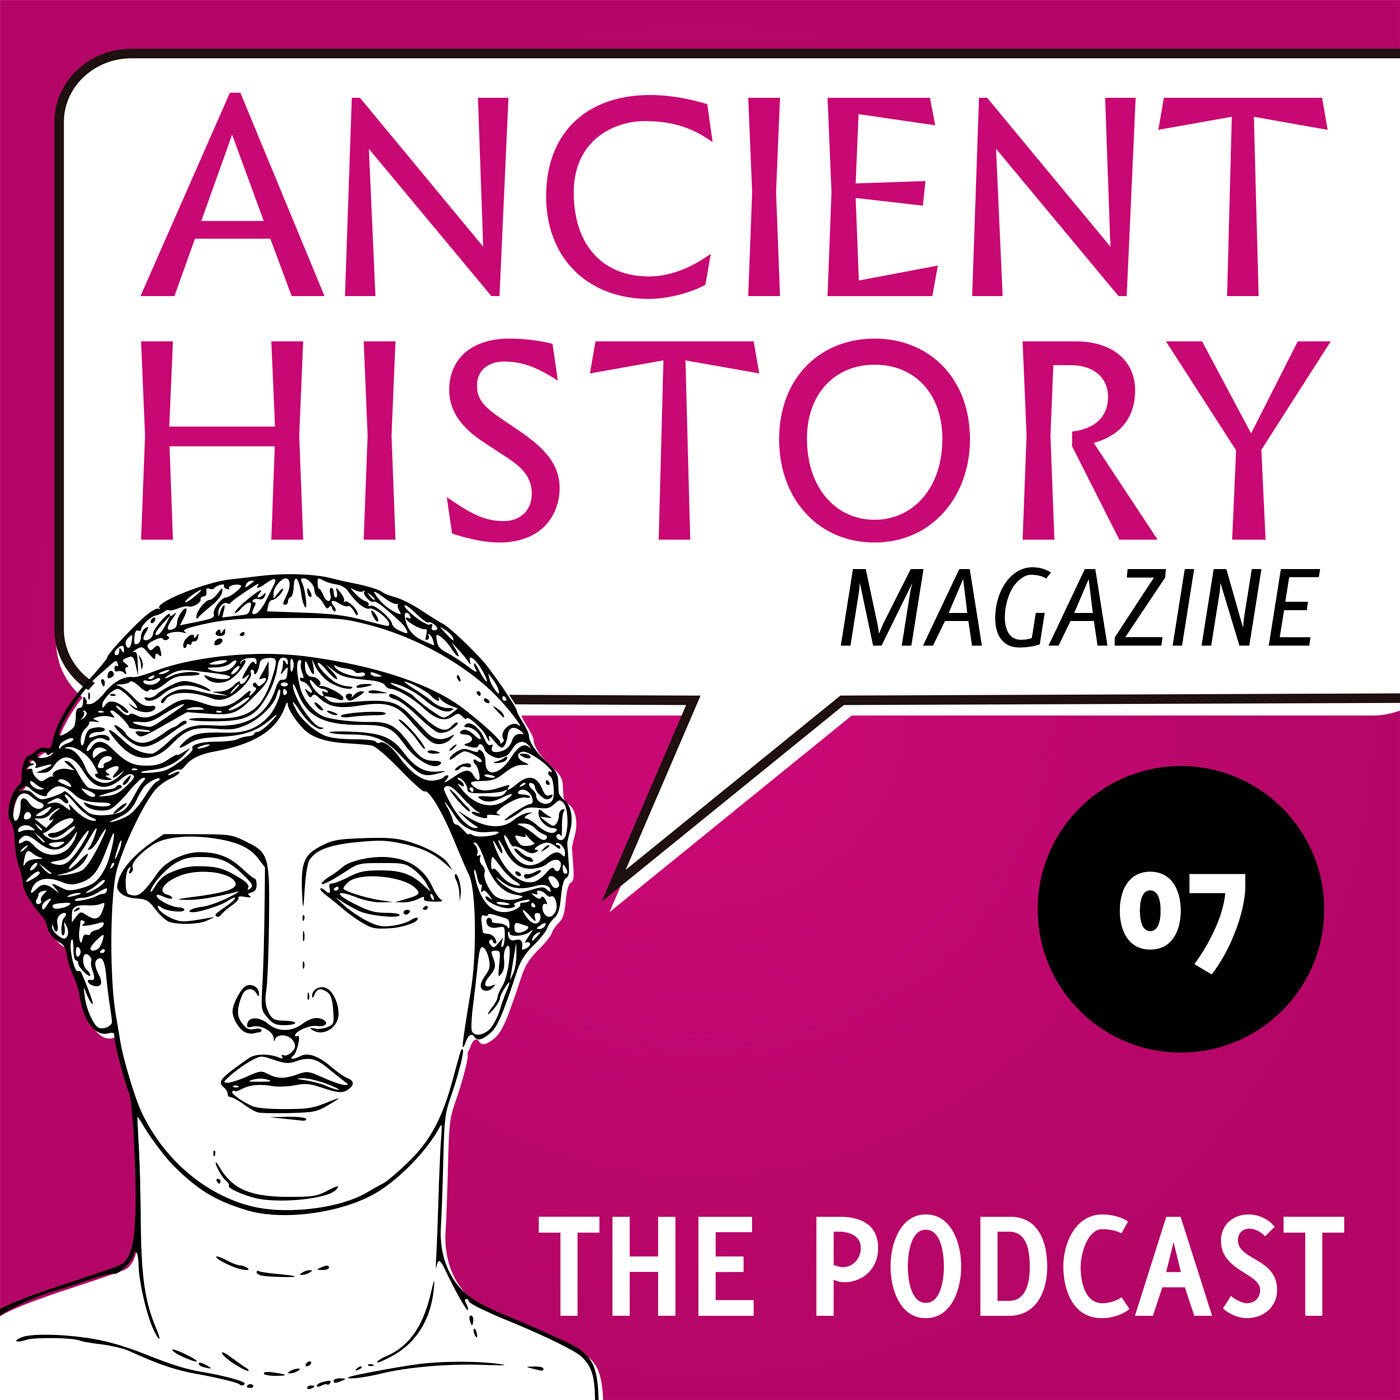 Ancient History Podcast - The Pharos Lighthouse with Andrew Michael Chugg